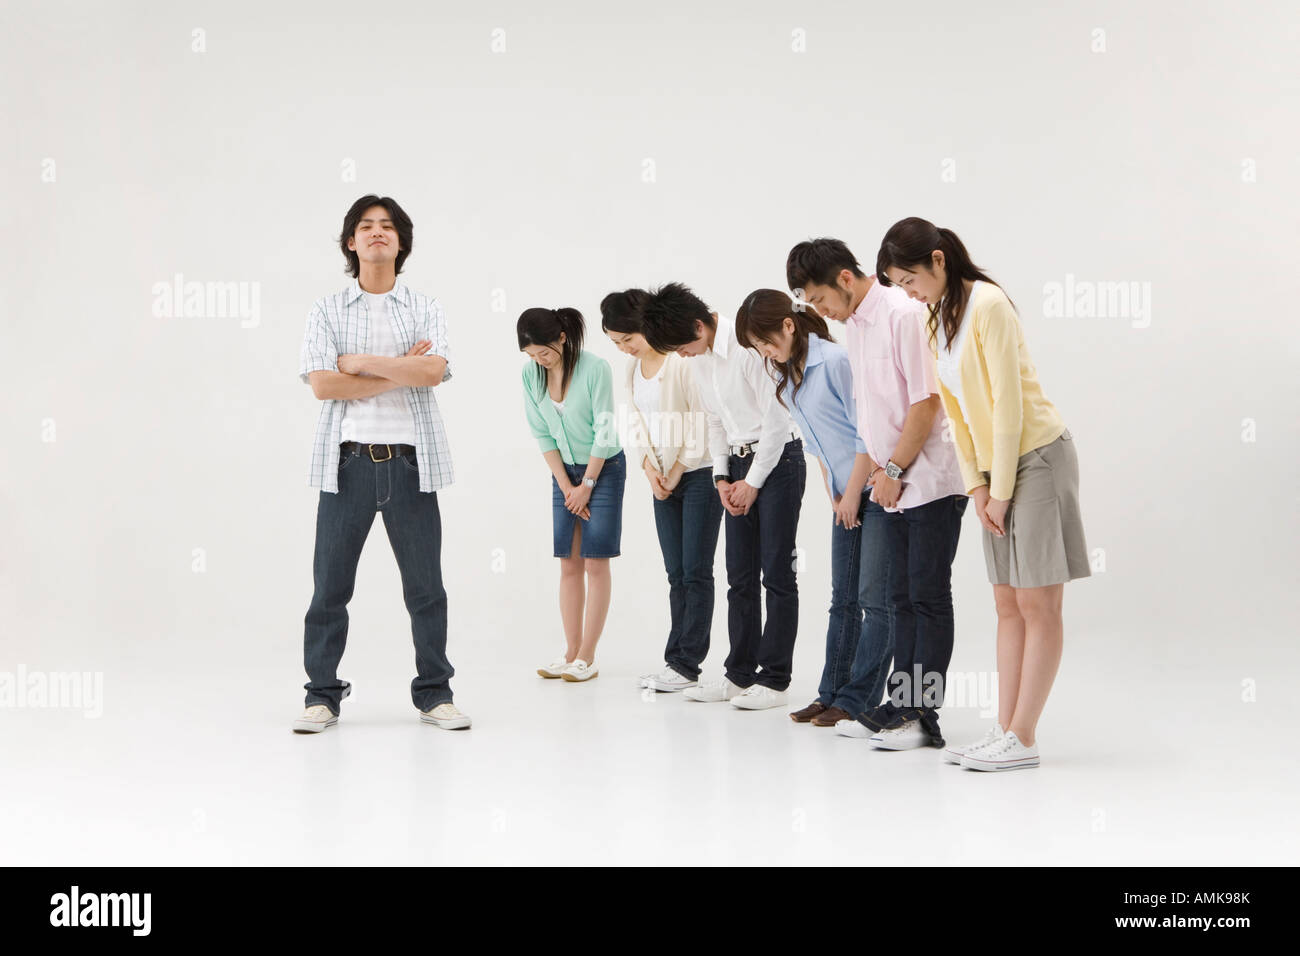 Group of people bowing to a young man Stock Photo